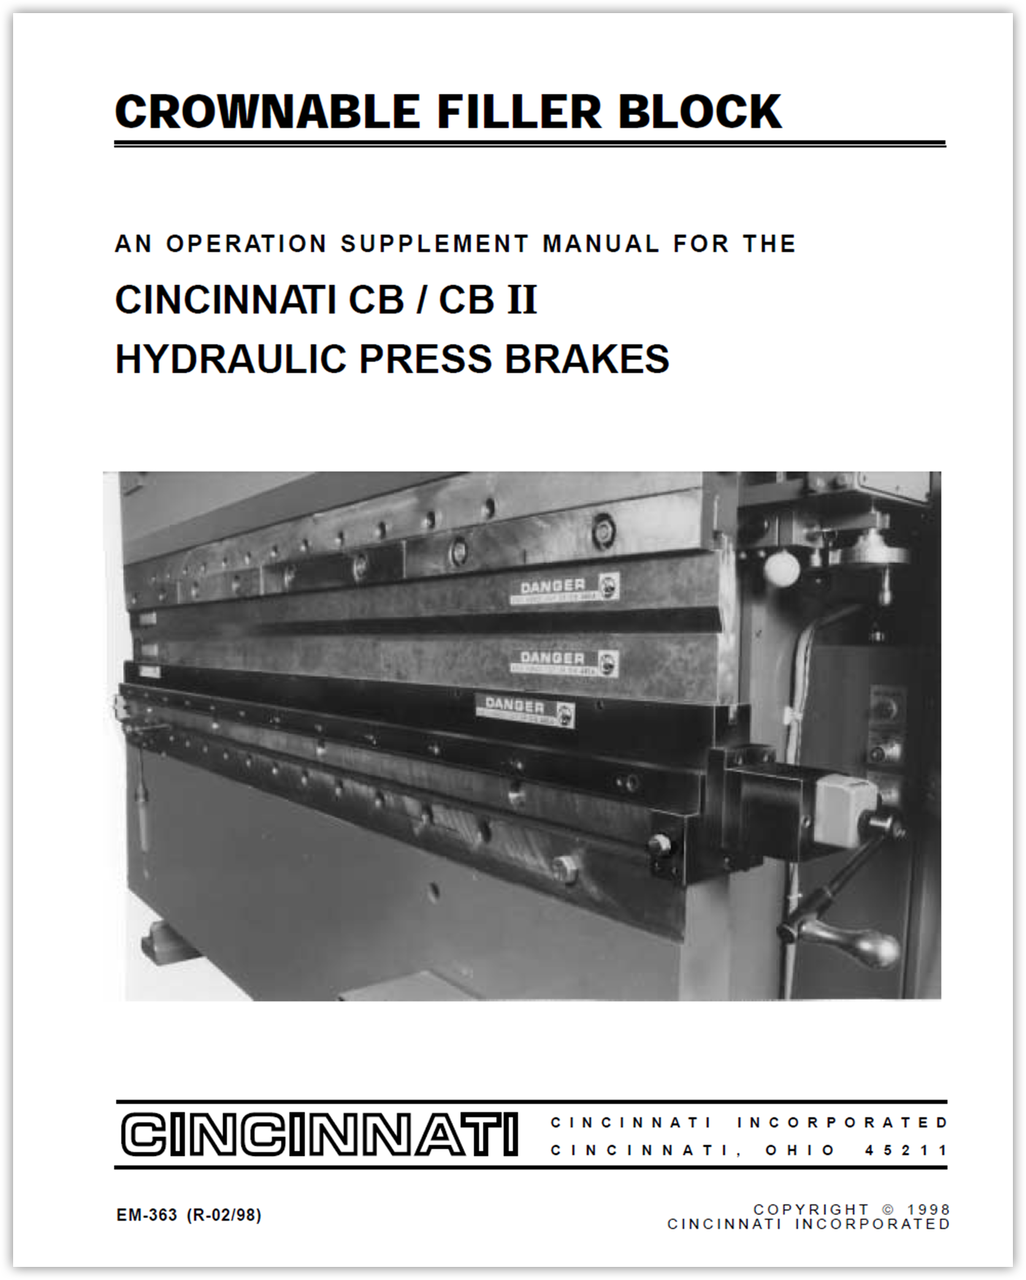 EM-363 (R-02-98) Crownable Filler Block - An Operation Supplement Manual for the CB and CB II Hydraulic Press Brakes